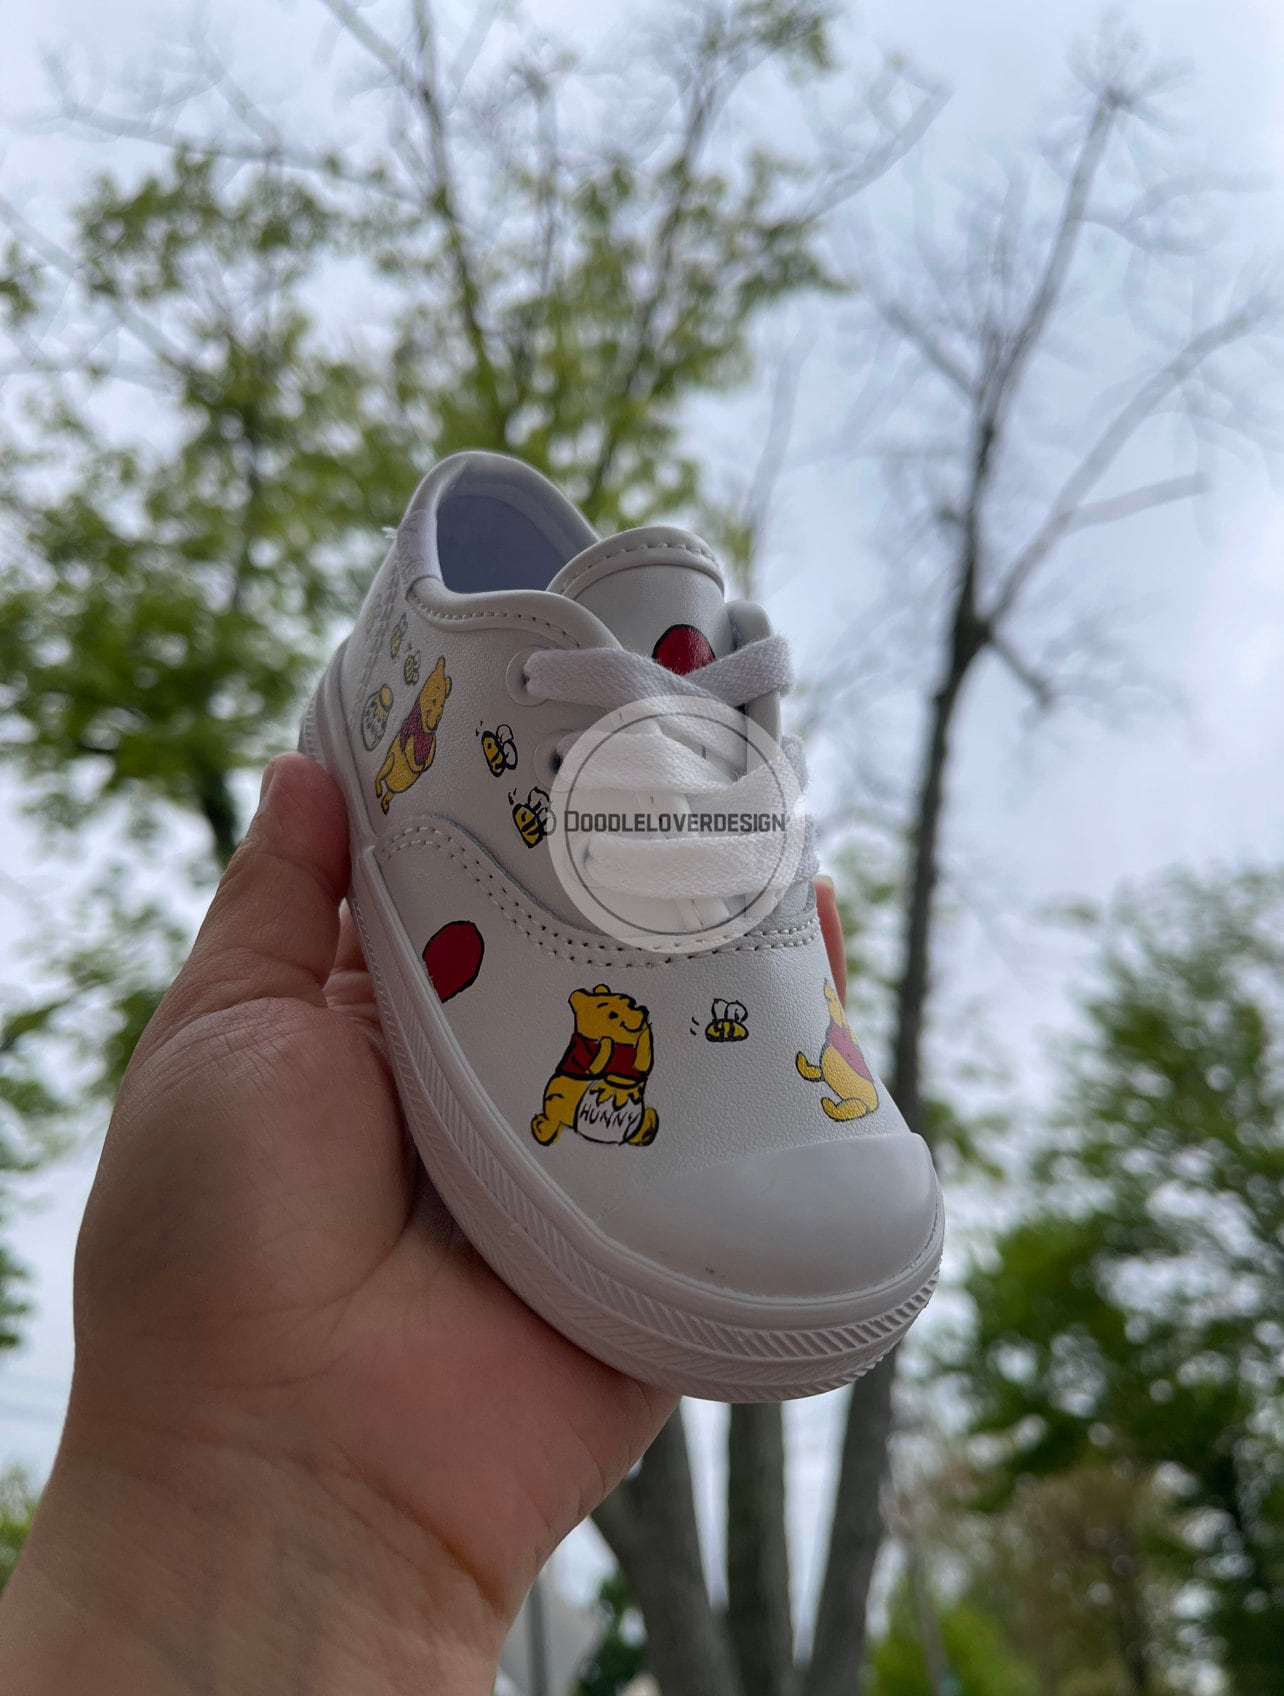 Australische persoon Panter lont Toddler / Kids / Baby Custom Pooh Bear Inspired Vans Shoes - Etsy